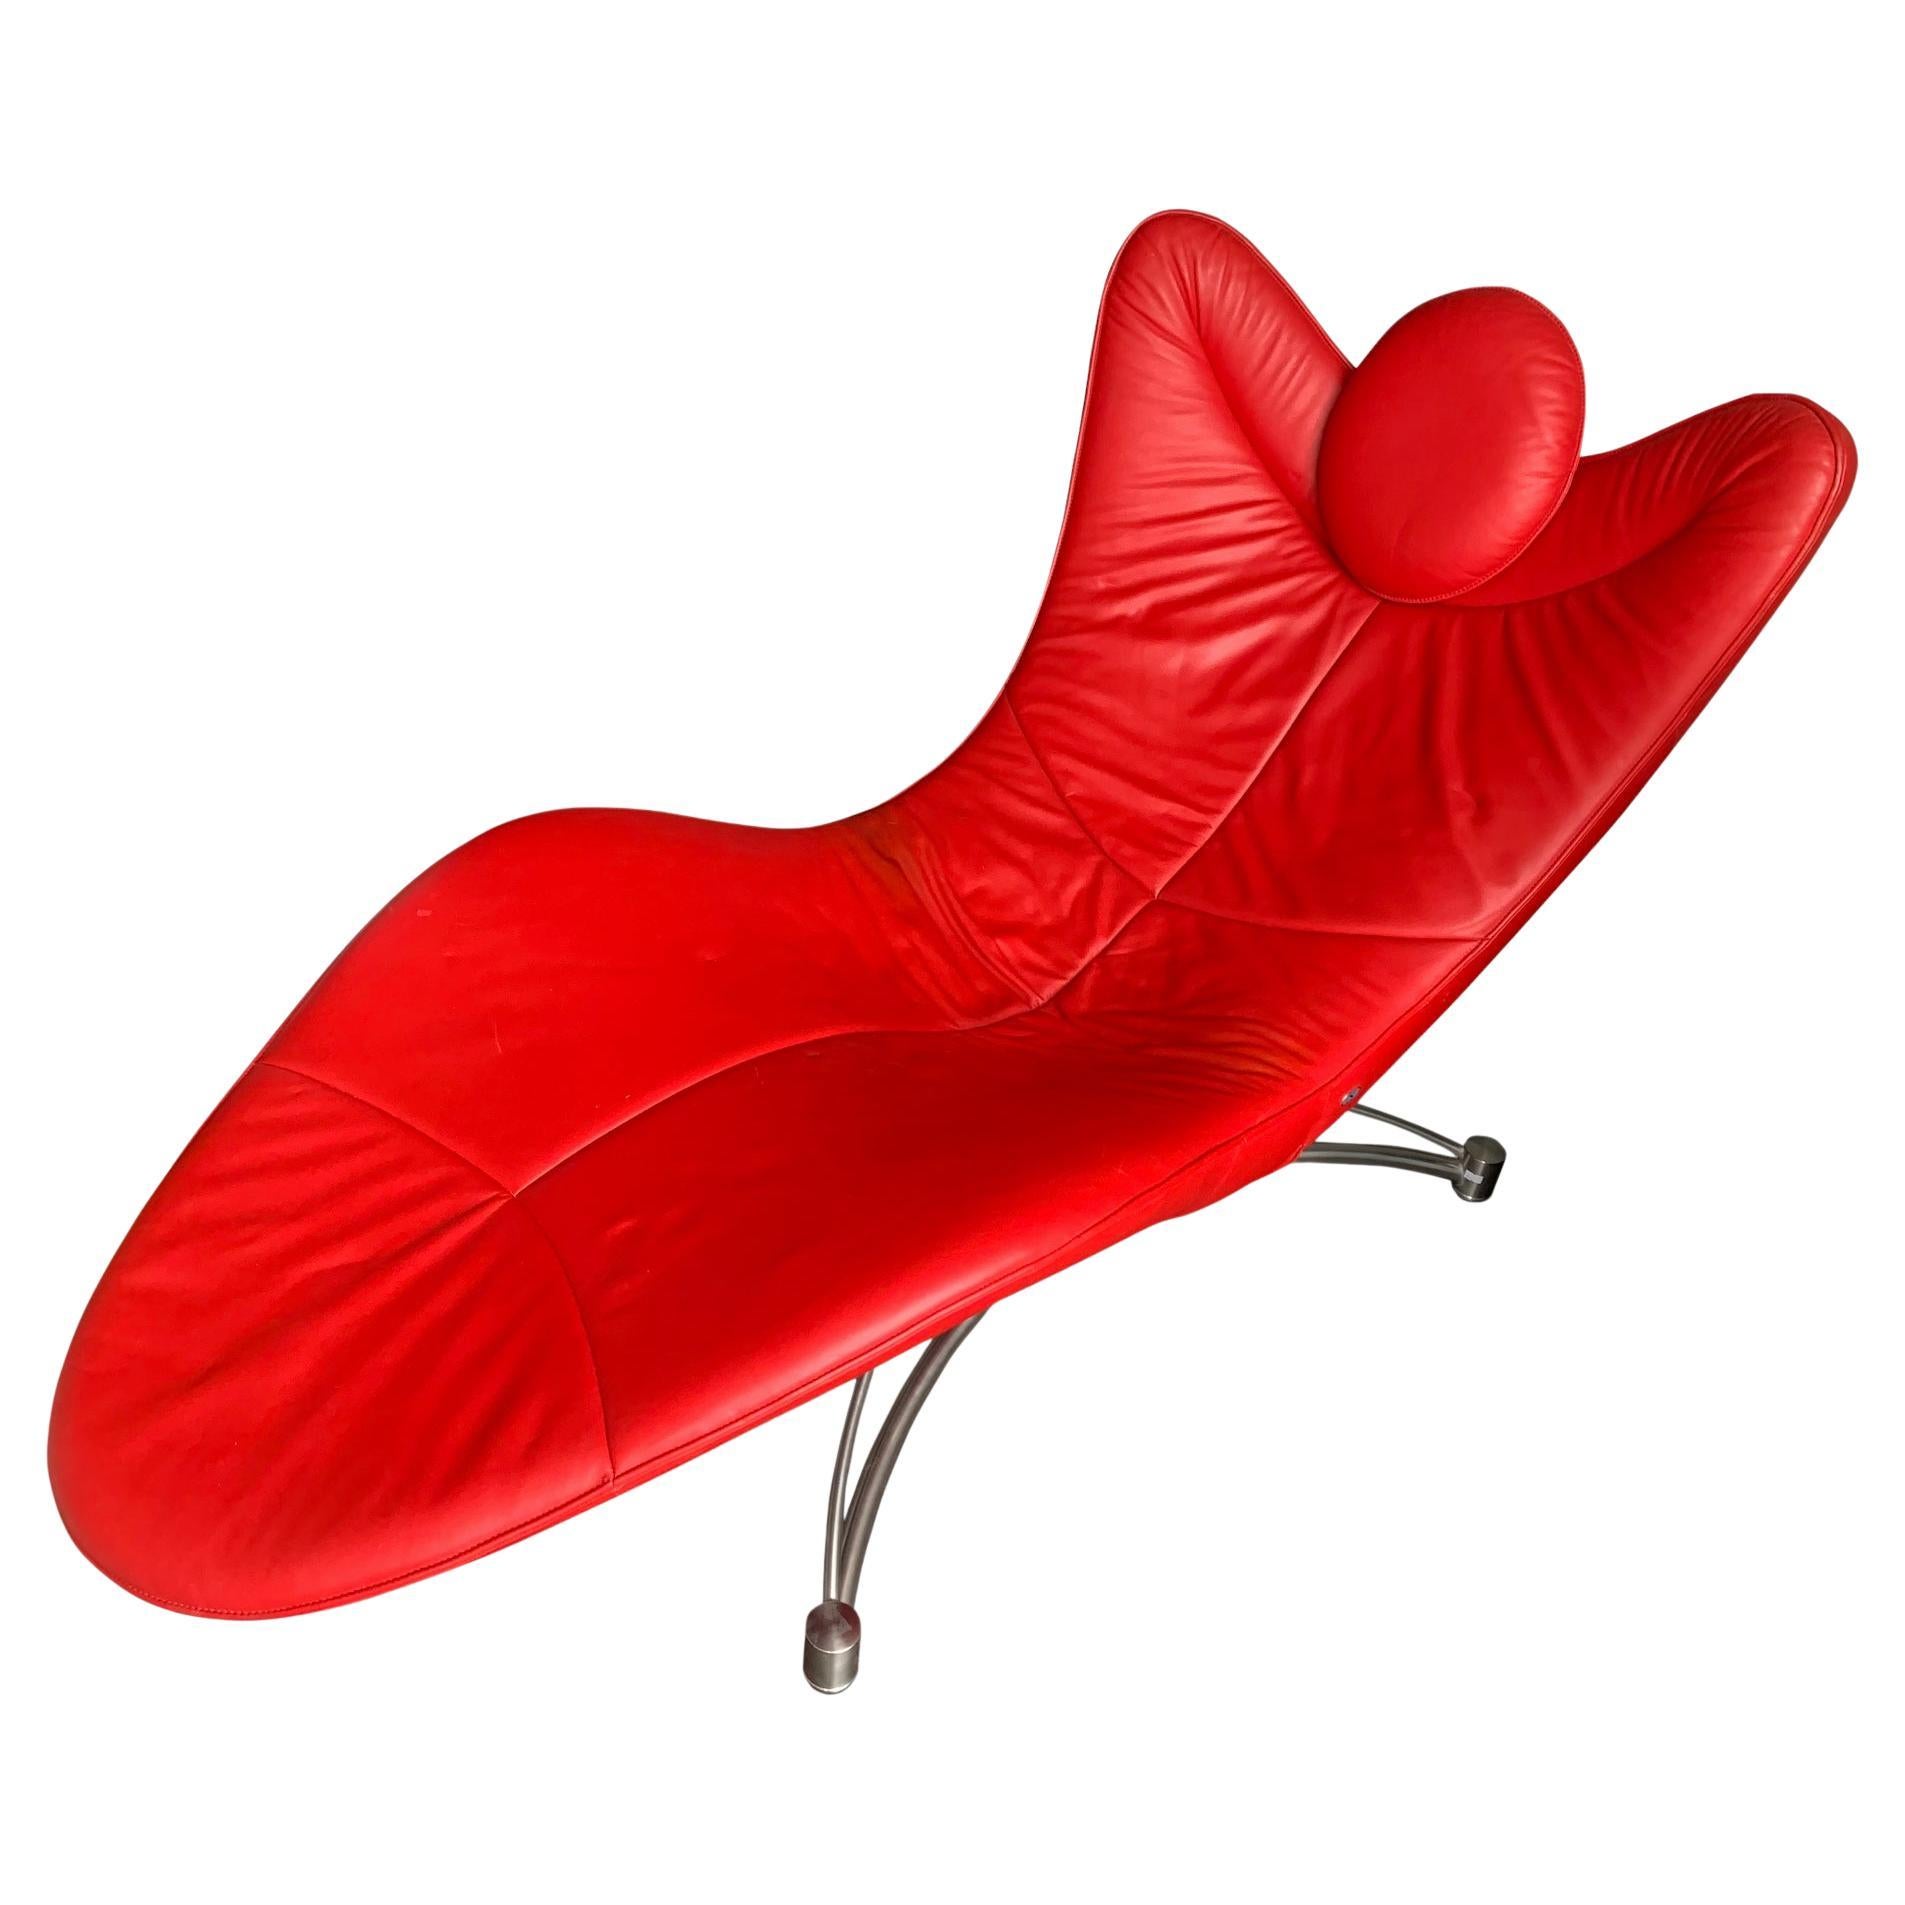 De Sede DS 151 Red Leather & Steel Jane Worthington Designer Chaise Lounge  For Sale